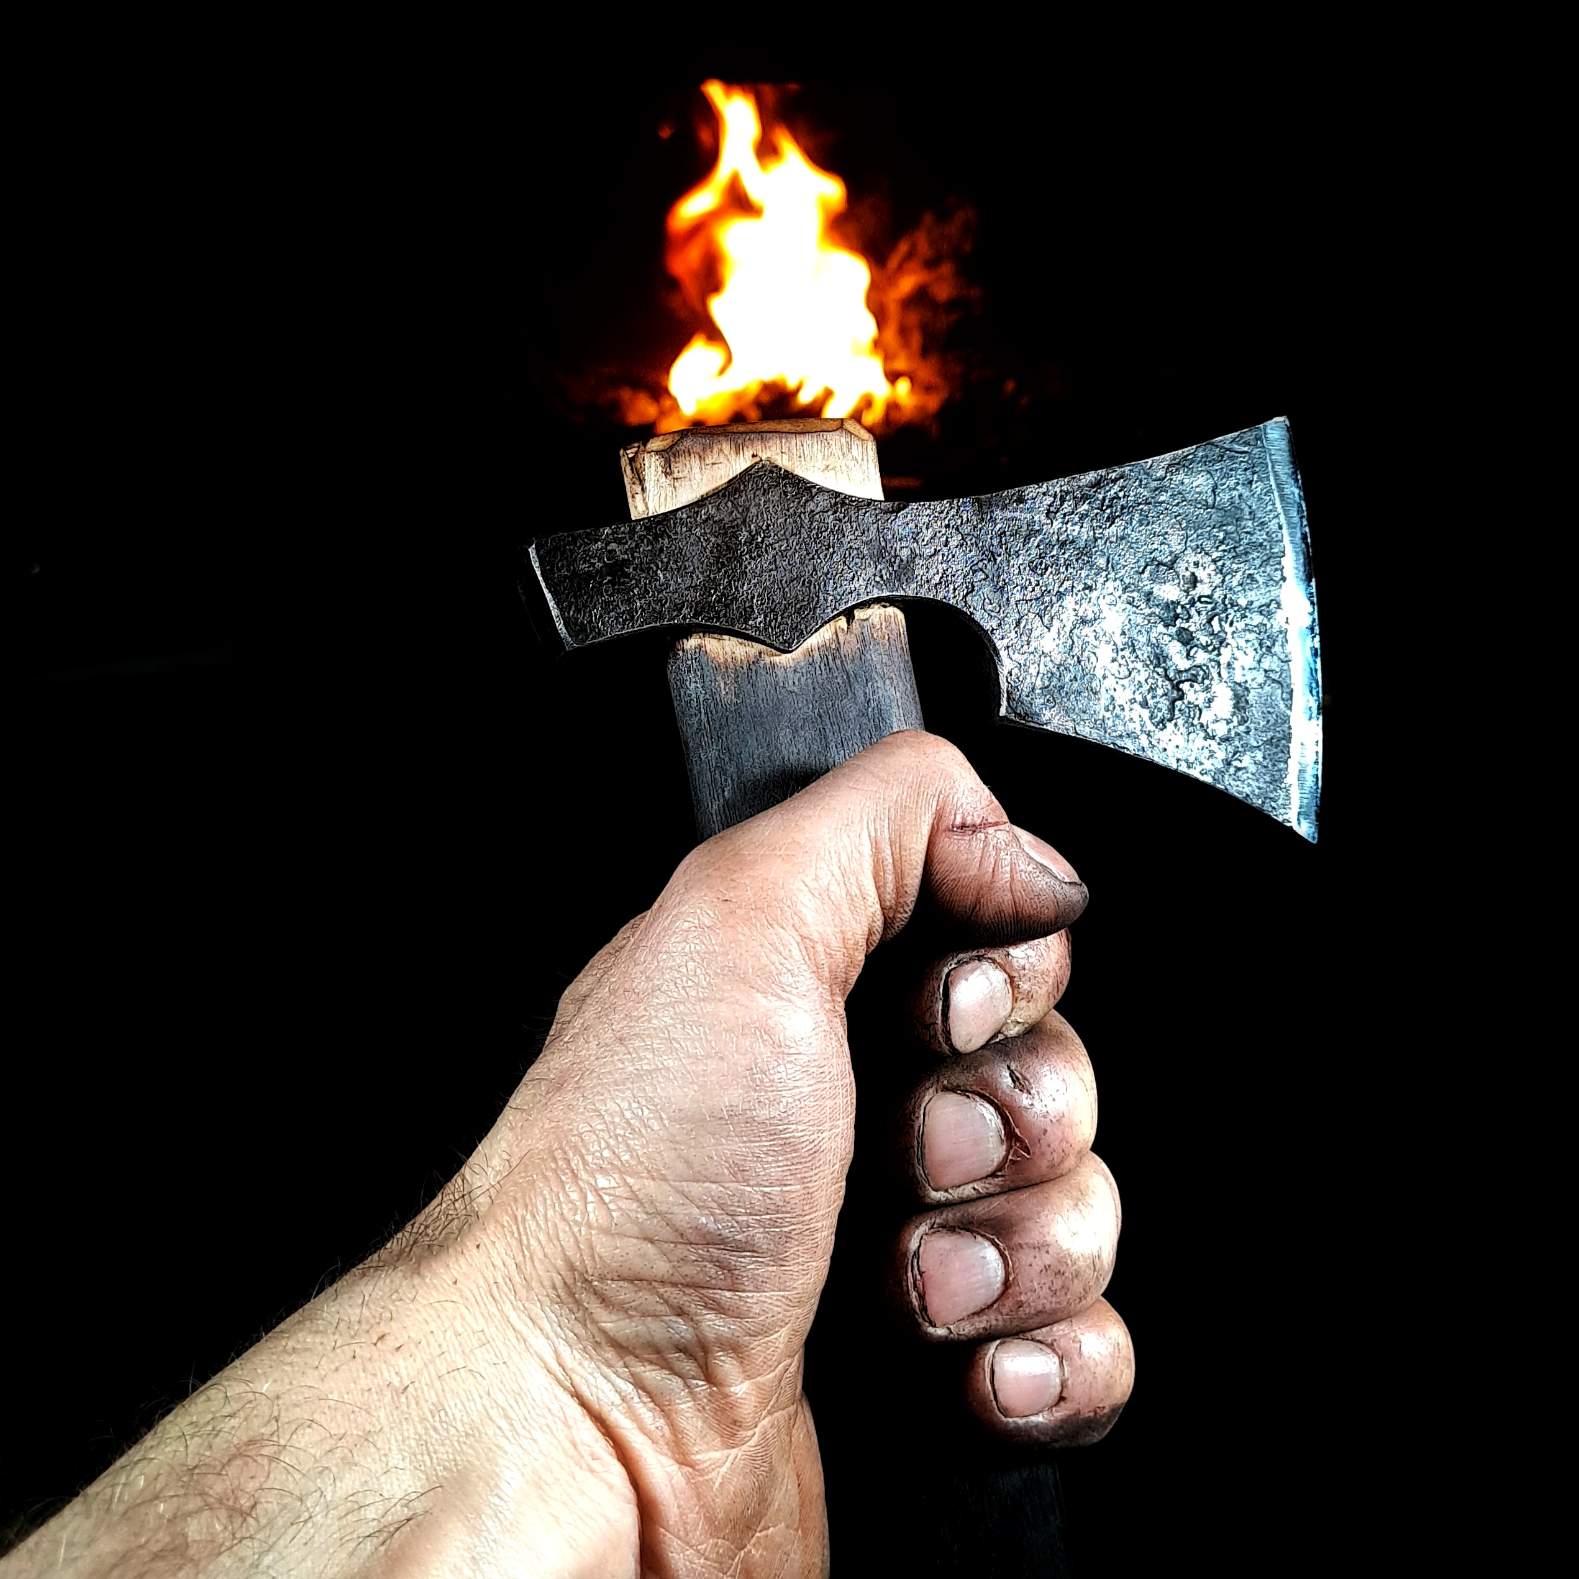 A photo of a skilled bushcraft enthusiast using an authentic hand-forged Viking axe to chop firewood. The axe is being used with precision and control, producing clean, well-placed cuts.